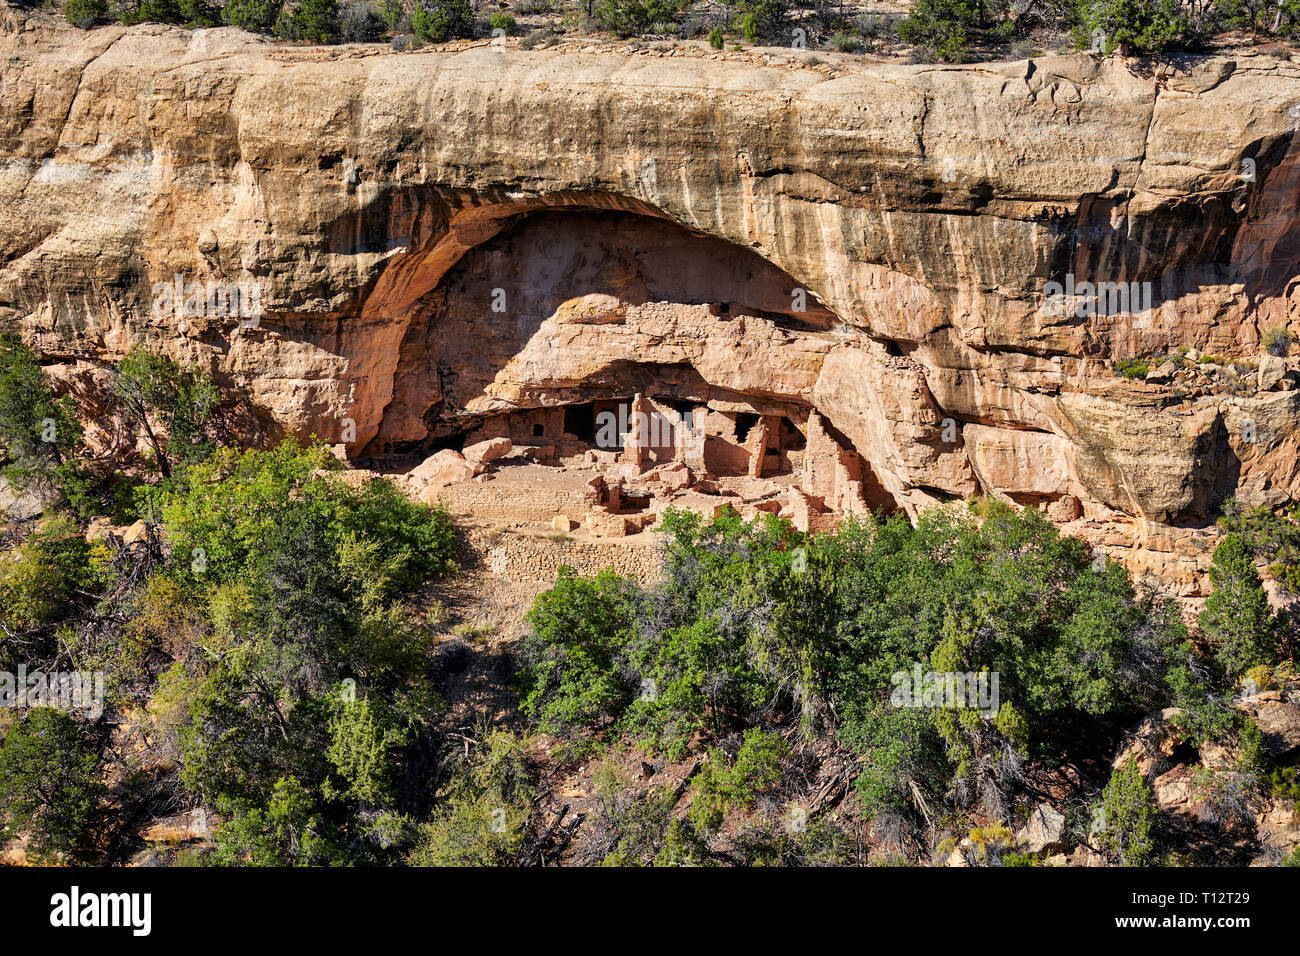 Oak tree house, Cliff dwellings in Mesa-Verde-National Park, UNESCO world heritage site, Colorado, USA, North America Stock Photo